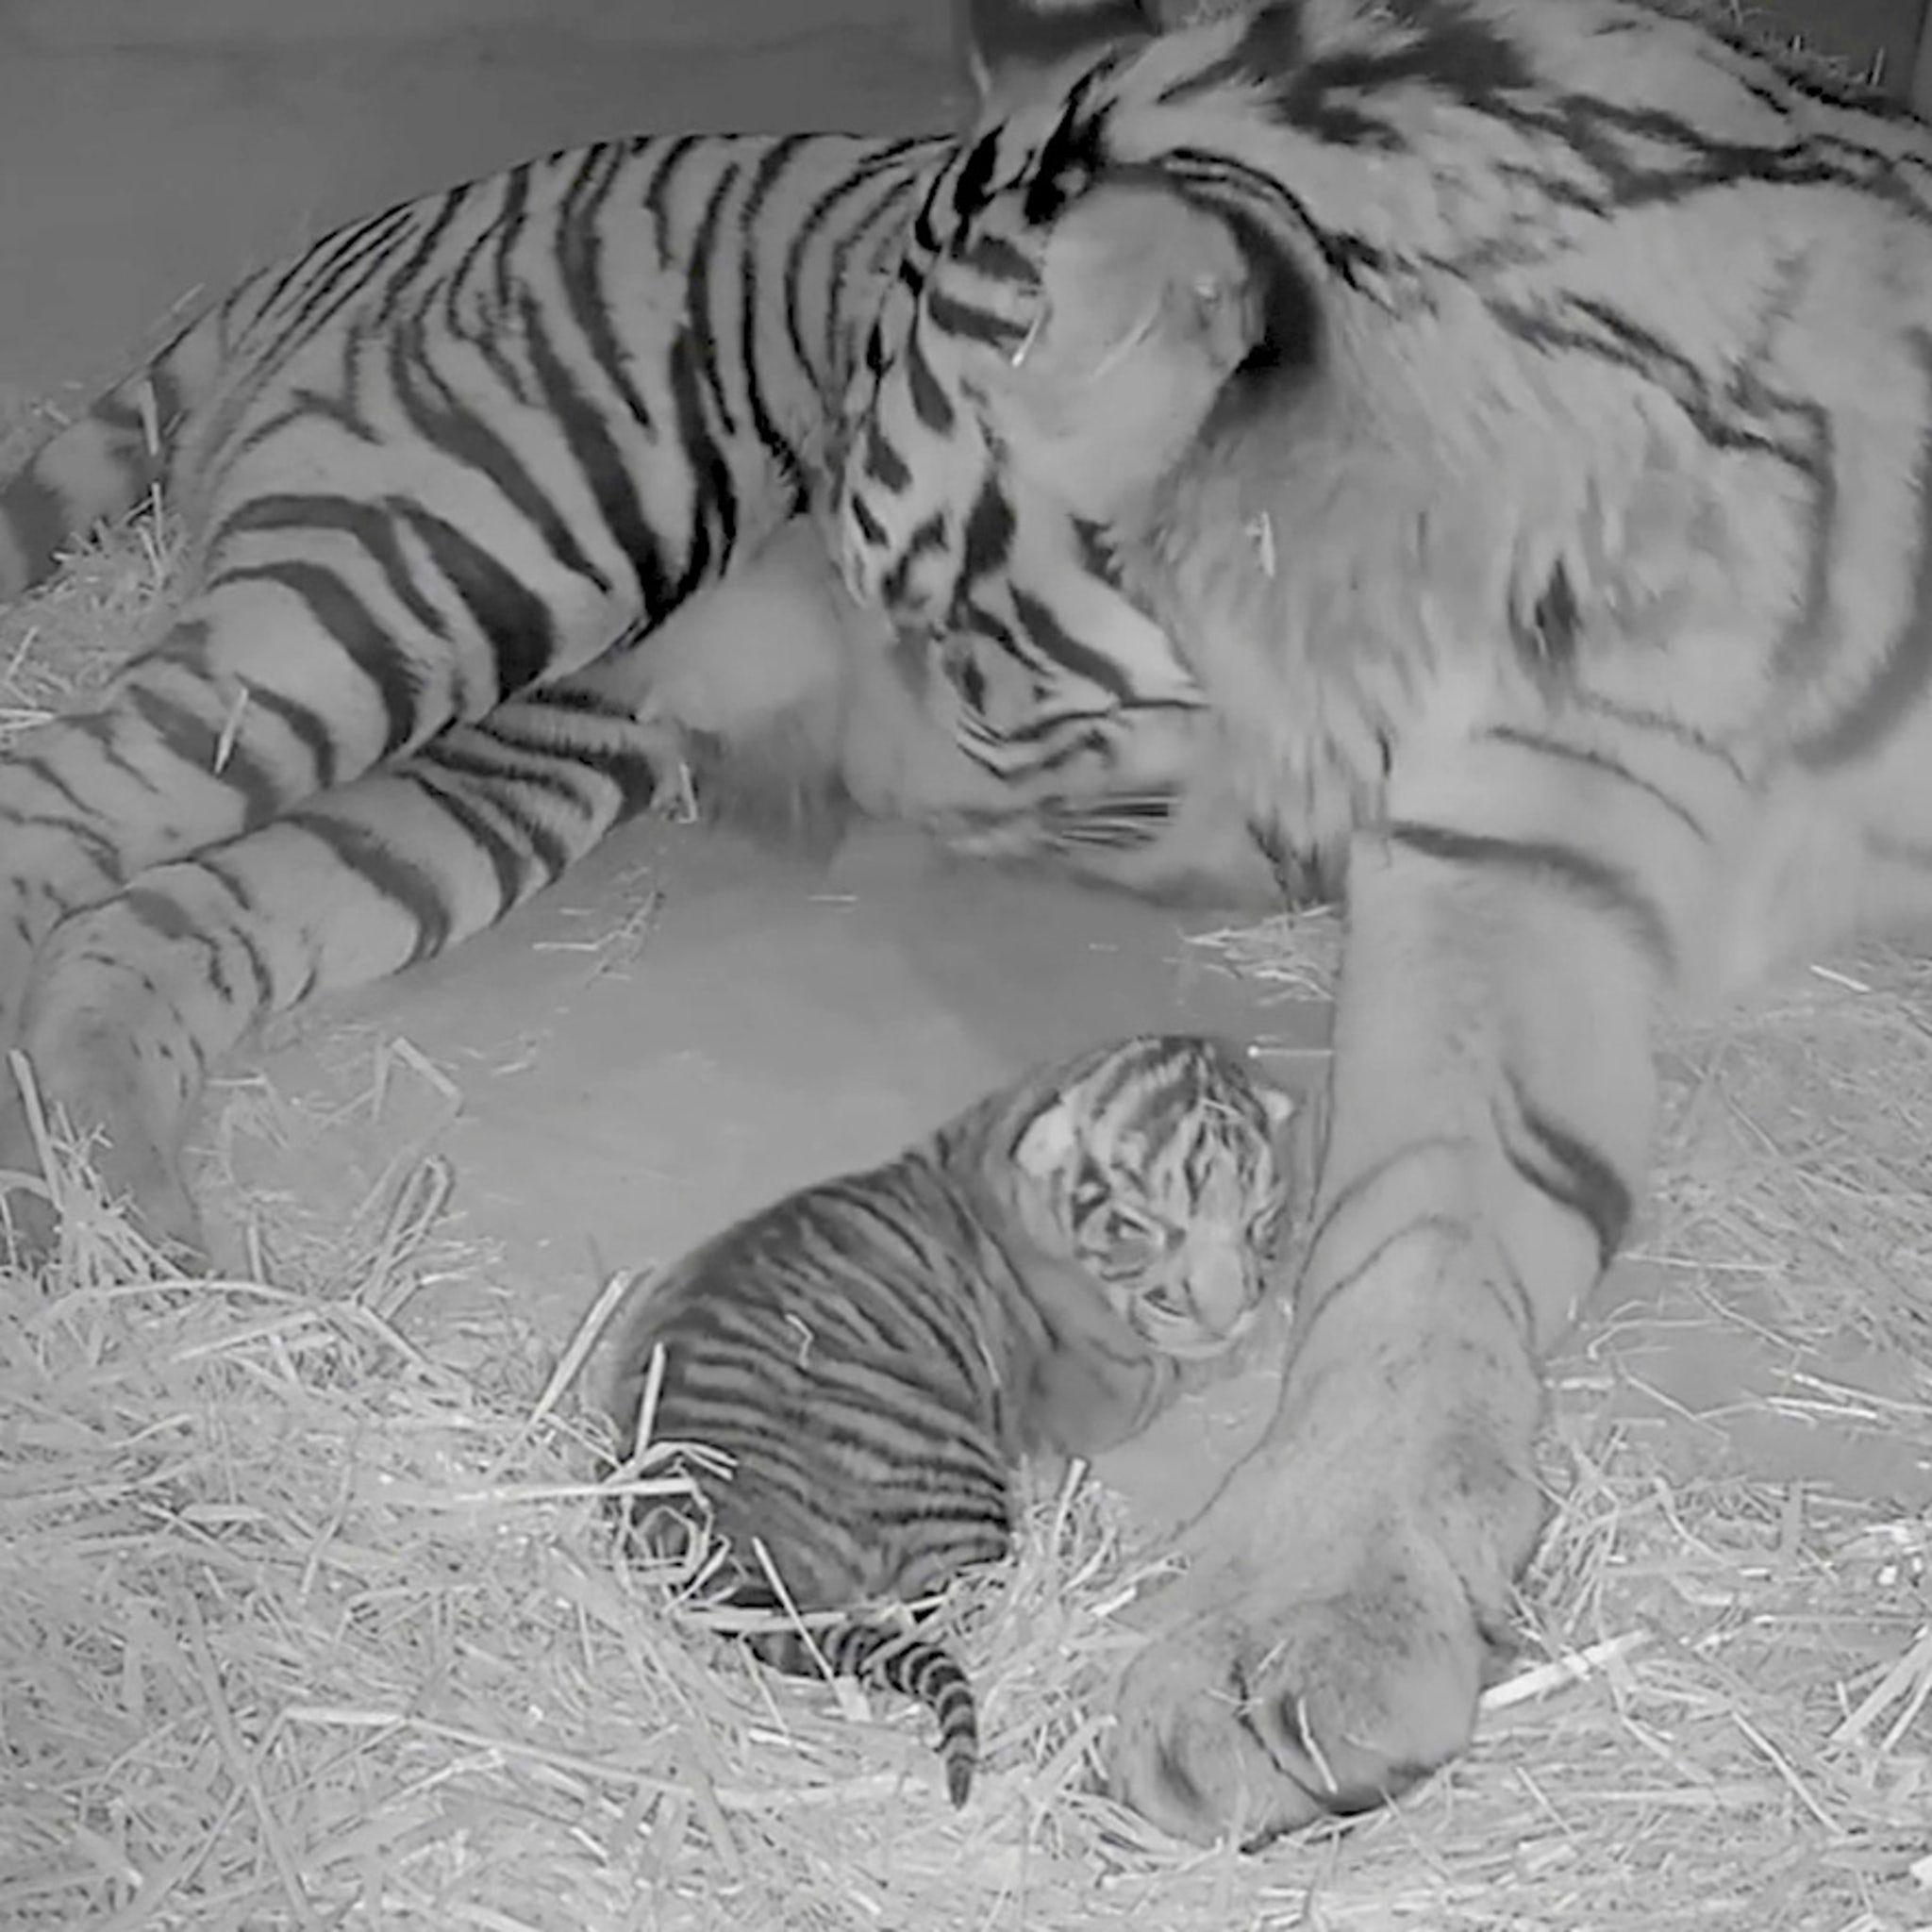 One in 100,000: Two rare tiger babies appear in Nantong - Global Times